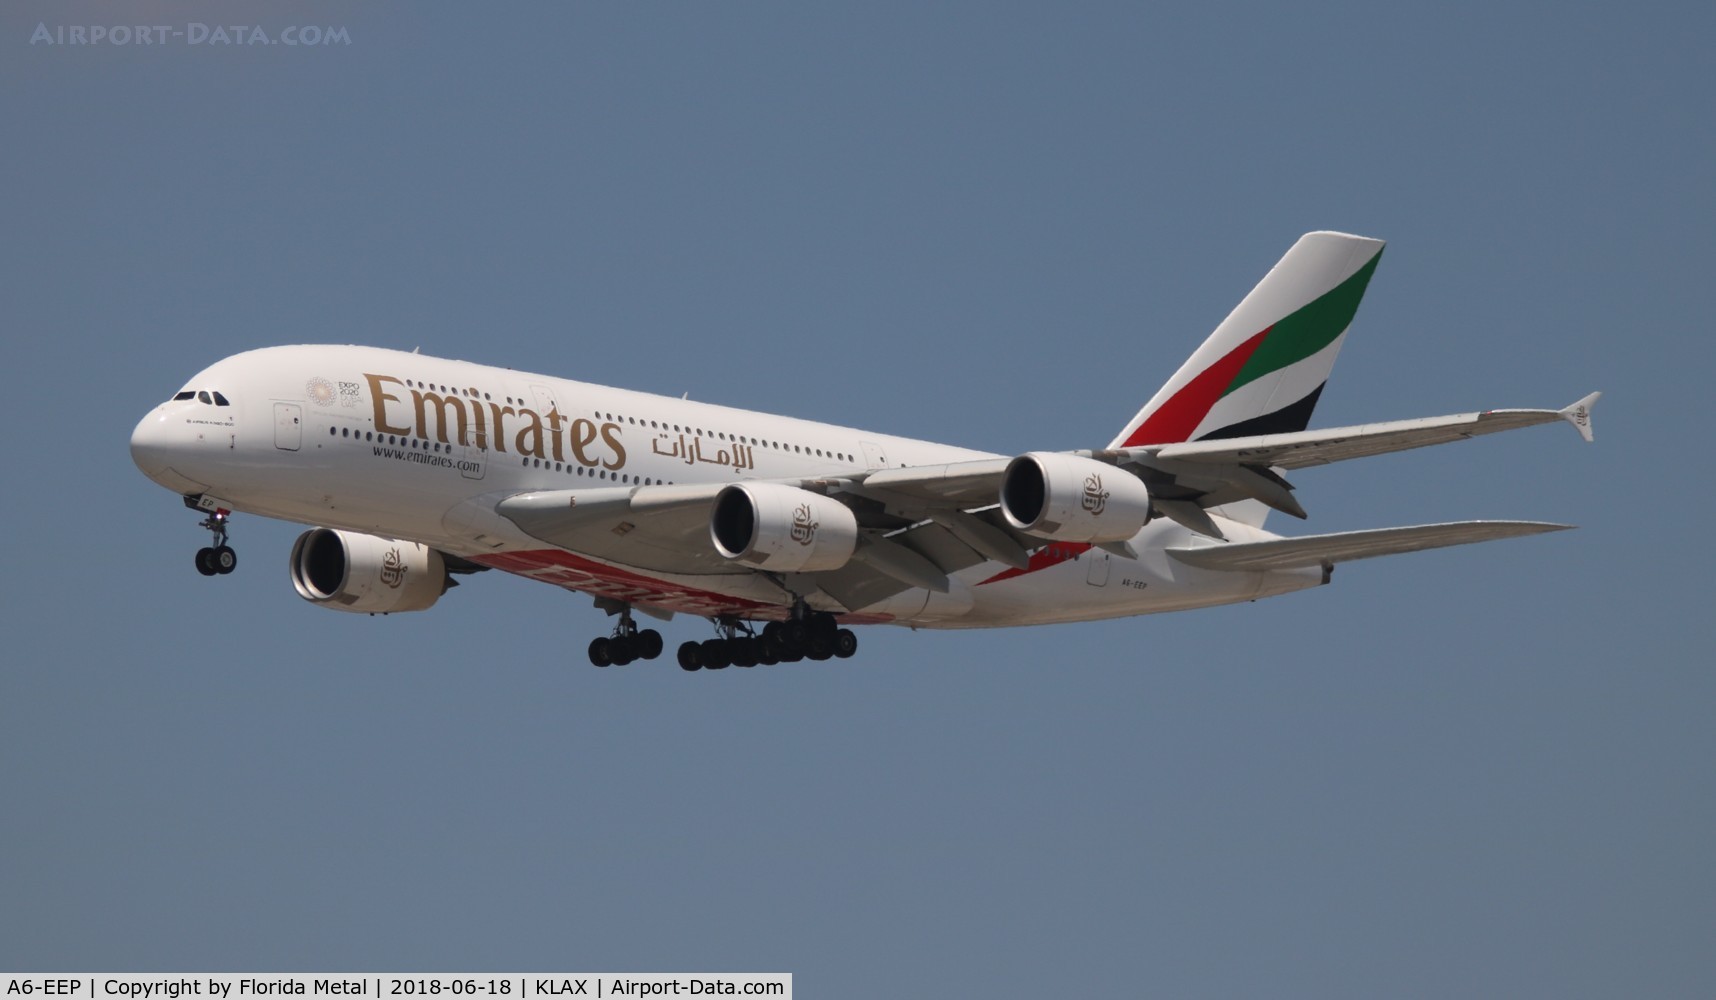 A6-EEP, 2013 Airbus A380-861 C/N 138, Emirates A380 zx